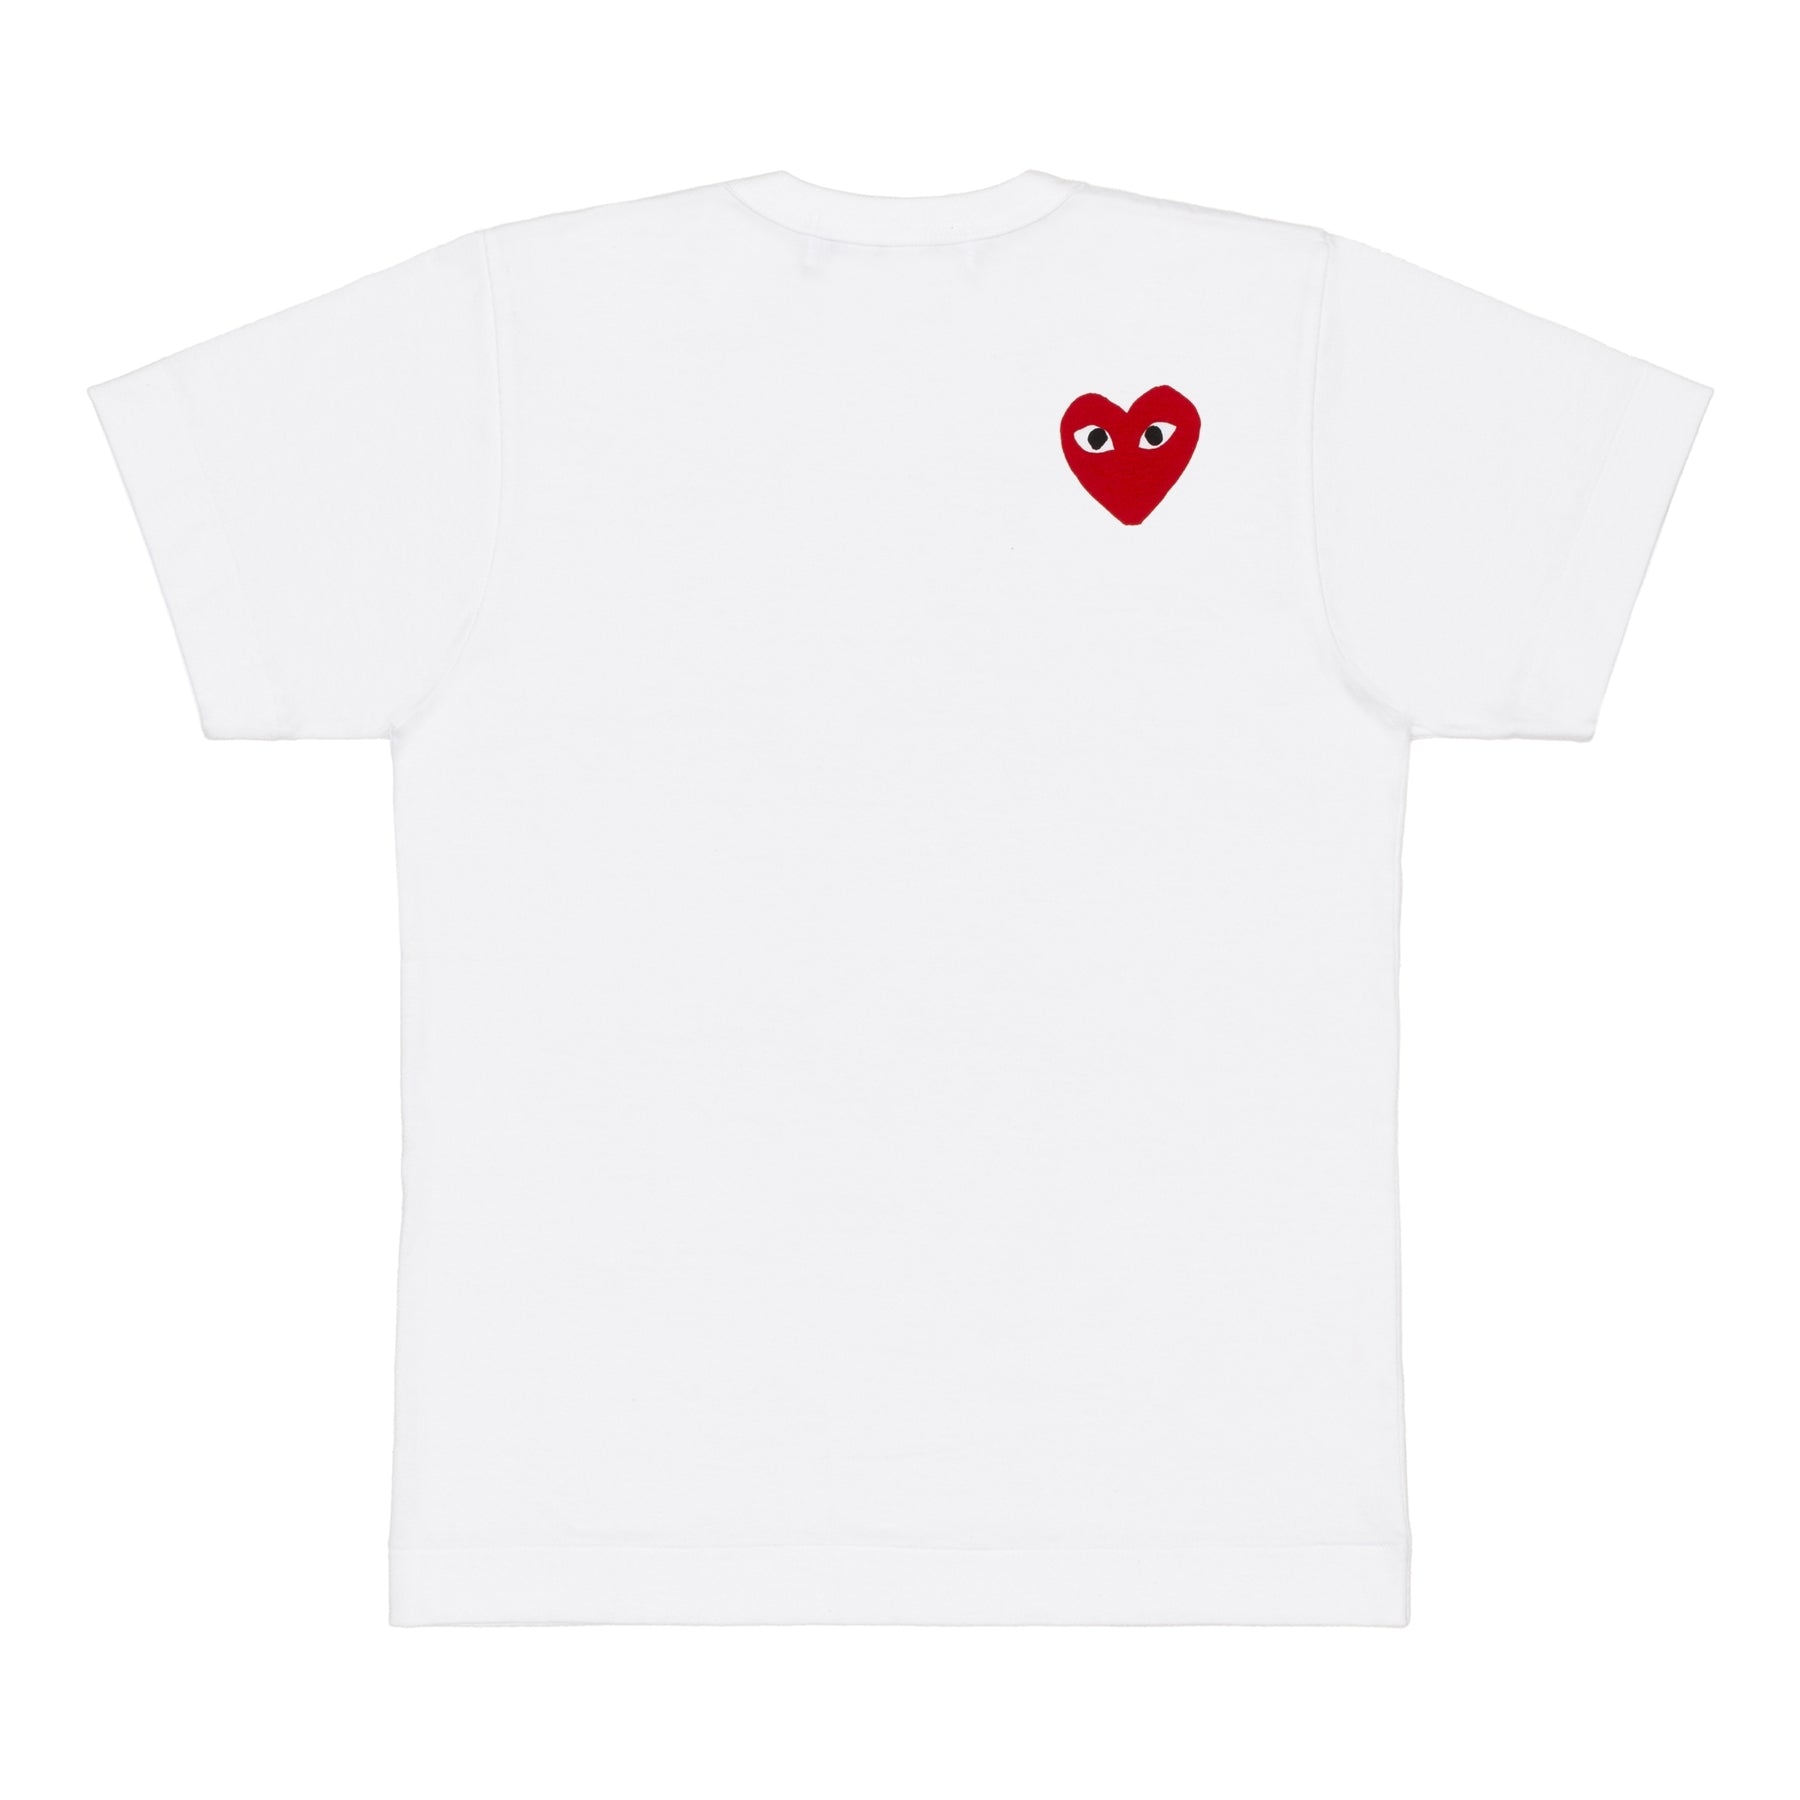 CDG PLAY - The North Face X Play T-Shirt - (White) view 2